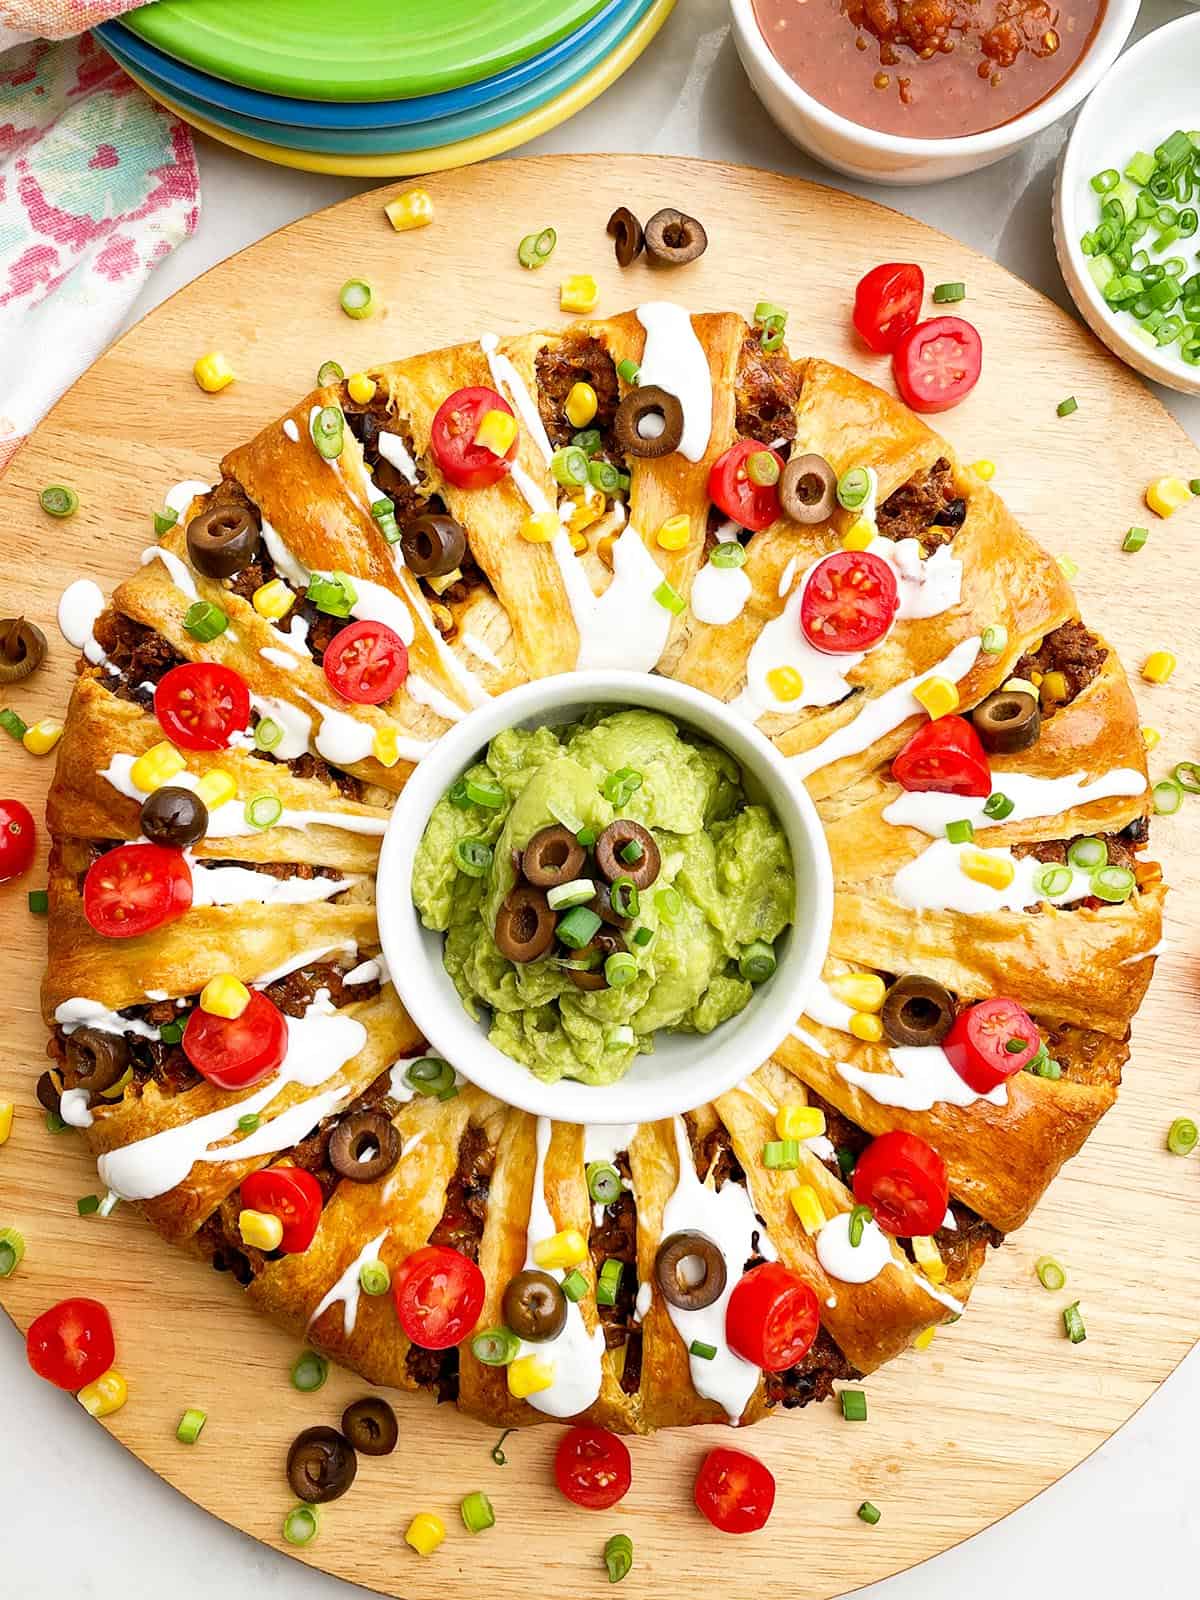 taco ring covered in toppings with guacamole in the center on a wooden cutting board.
